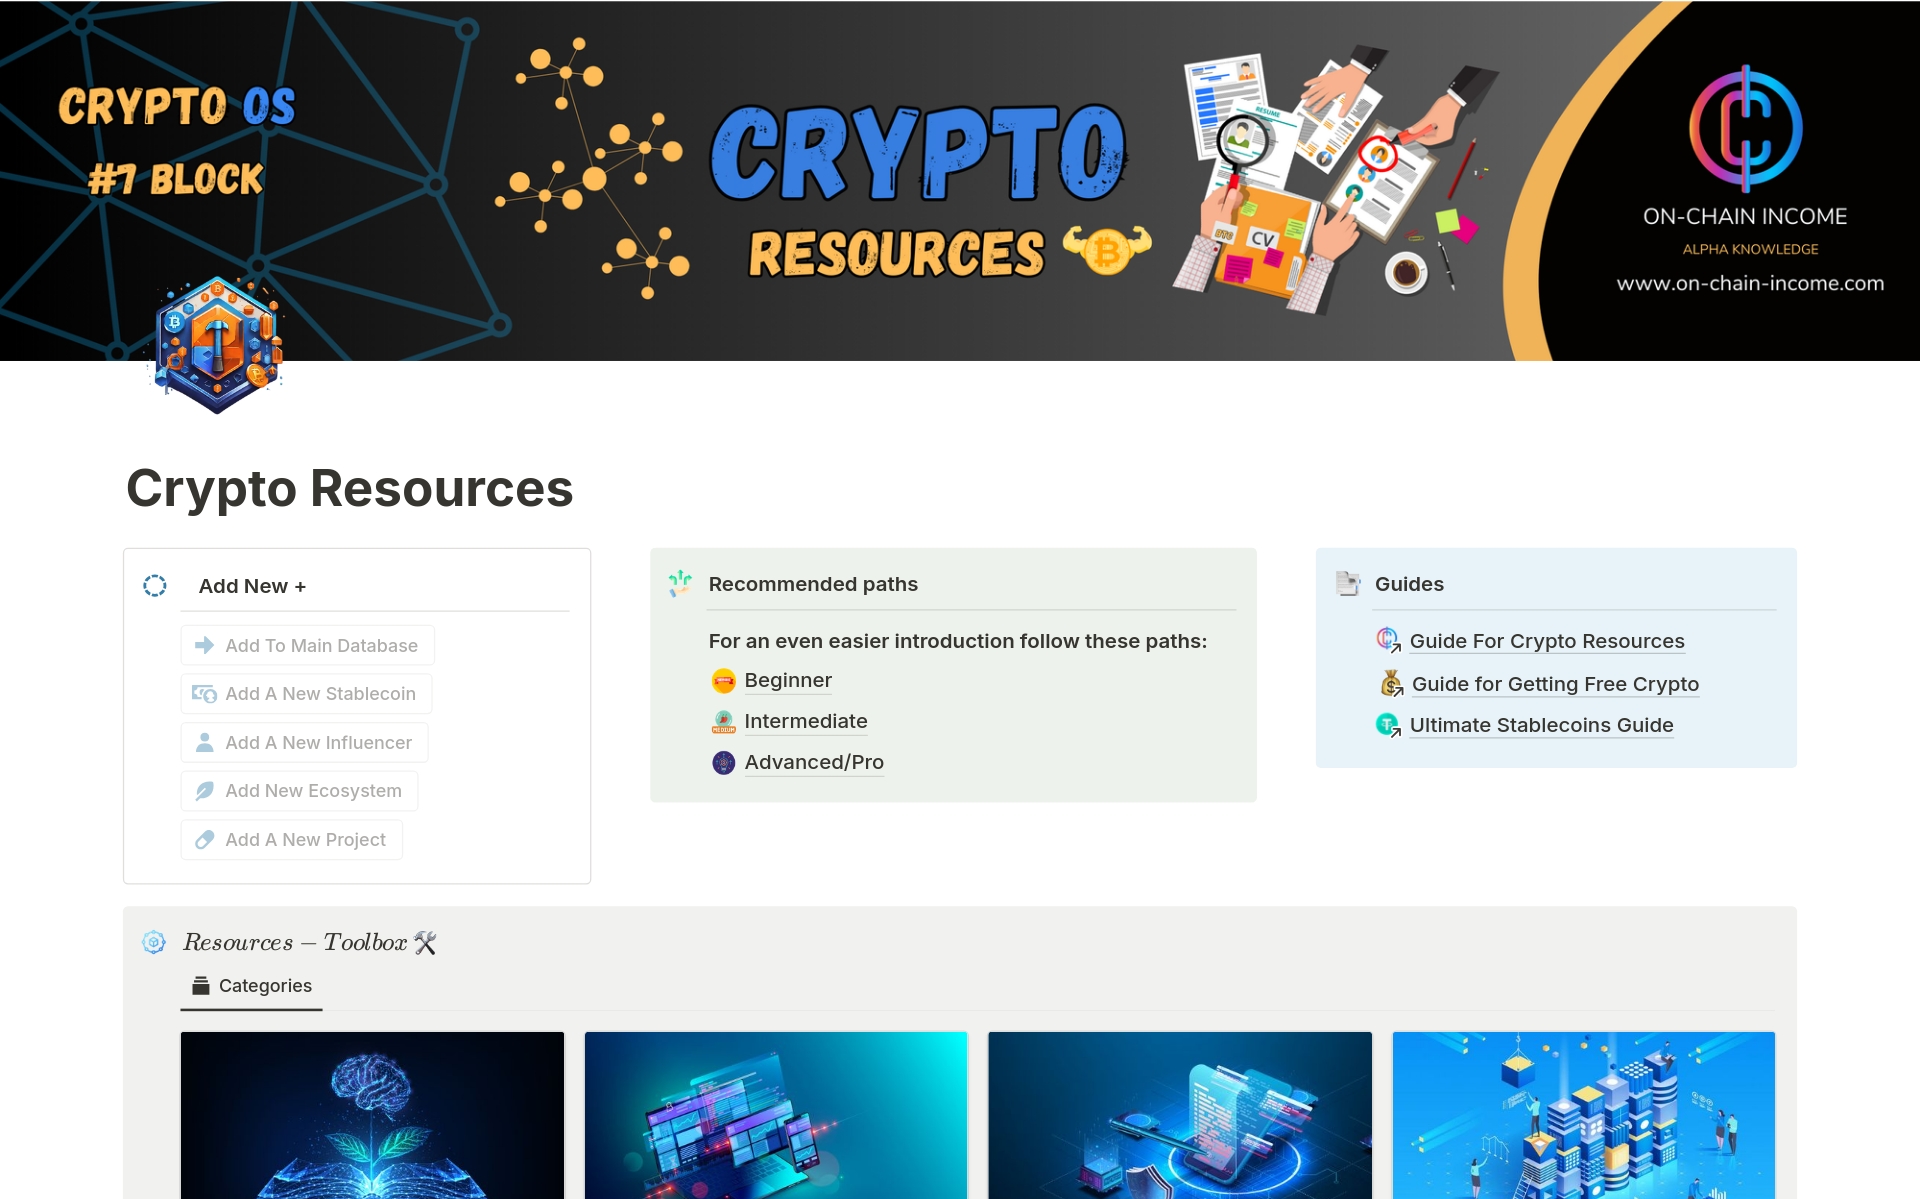 Crypto Made Easy, Essential Resources For Beginners! Stop the endless web search for crypto resources. Our comprehensive template has everything you need to navigate the crypto world in one convenient database.